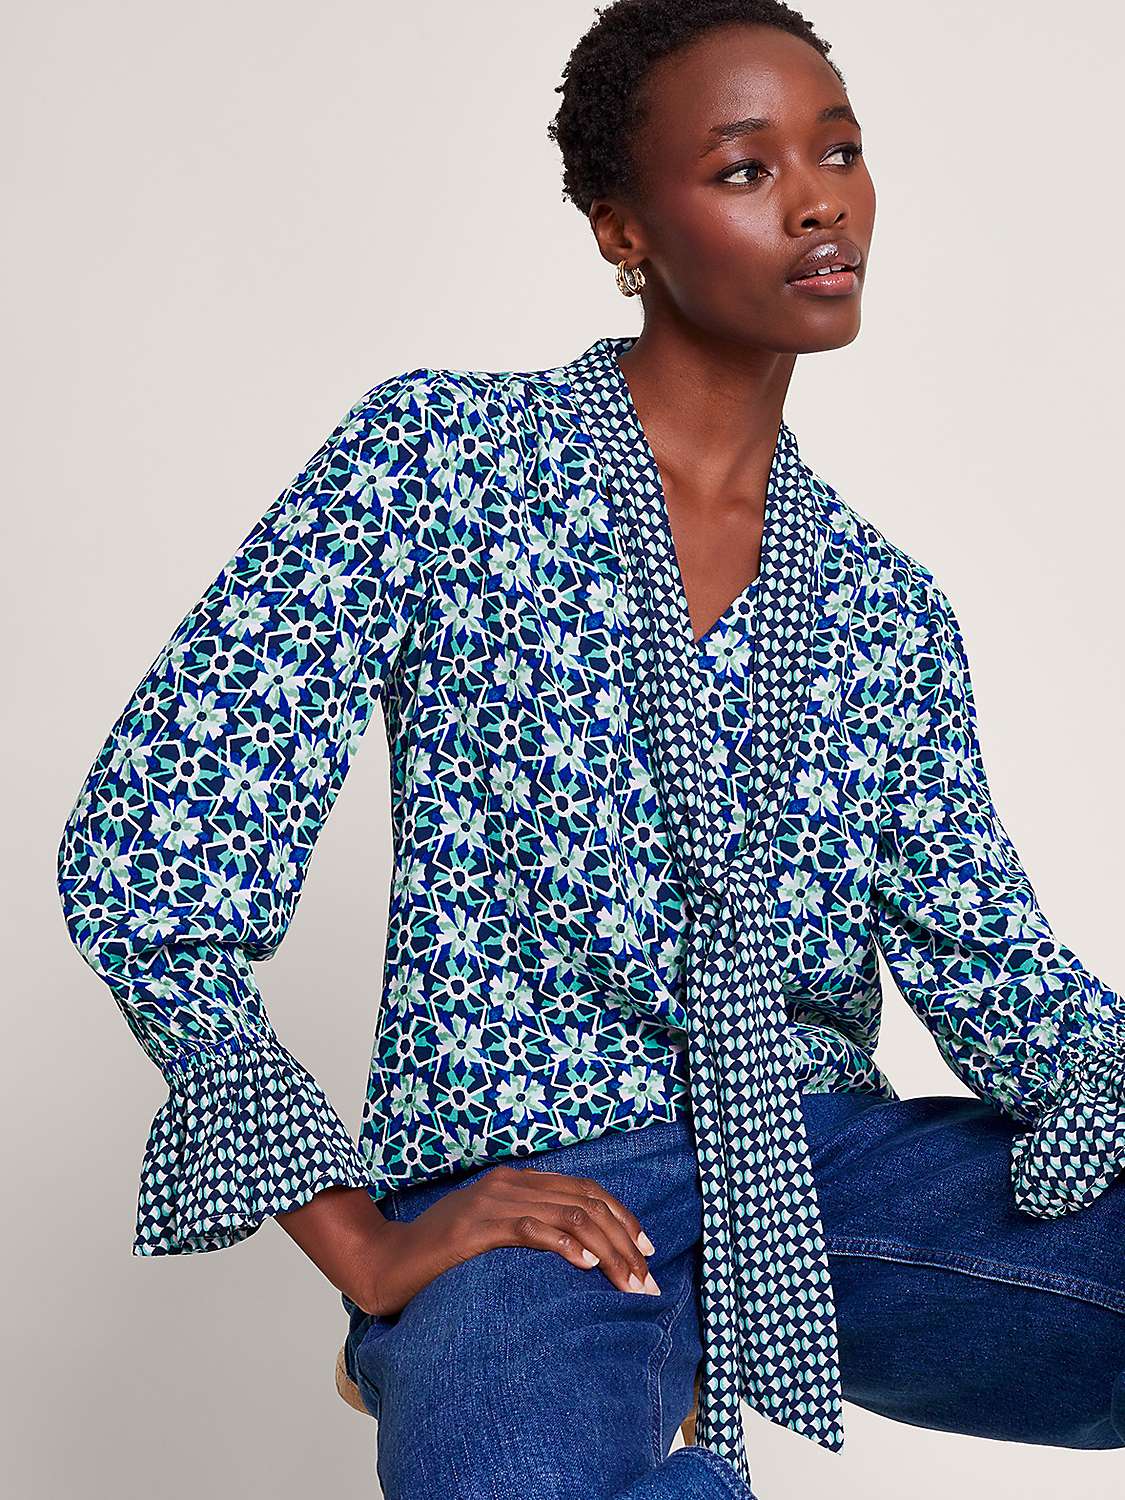 Buy Monsoon Clover Graphic Floral Print Pussybow Blouse, Navy/Multi Online at johnlewis.com